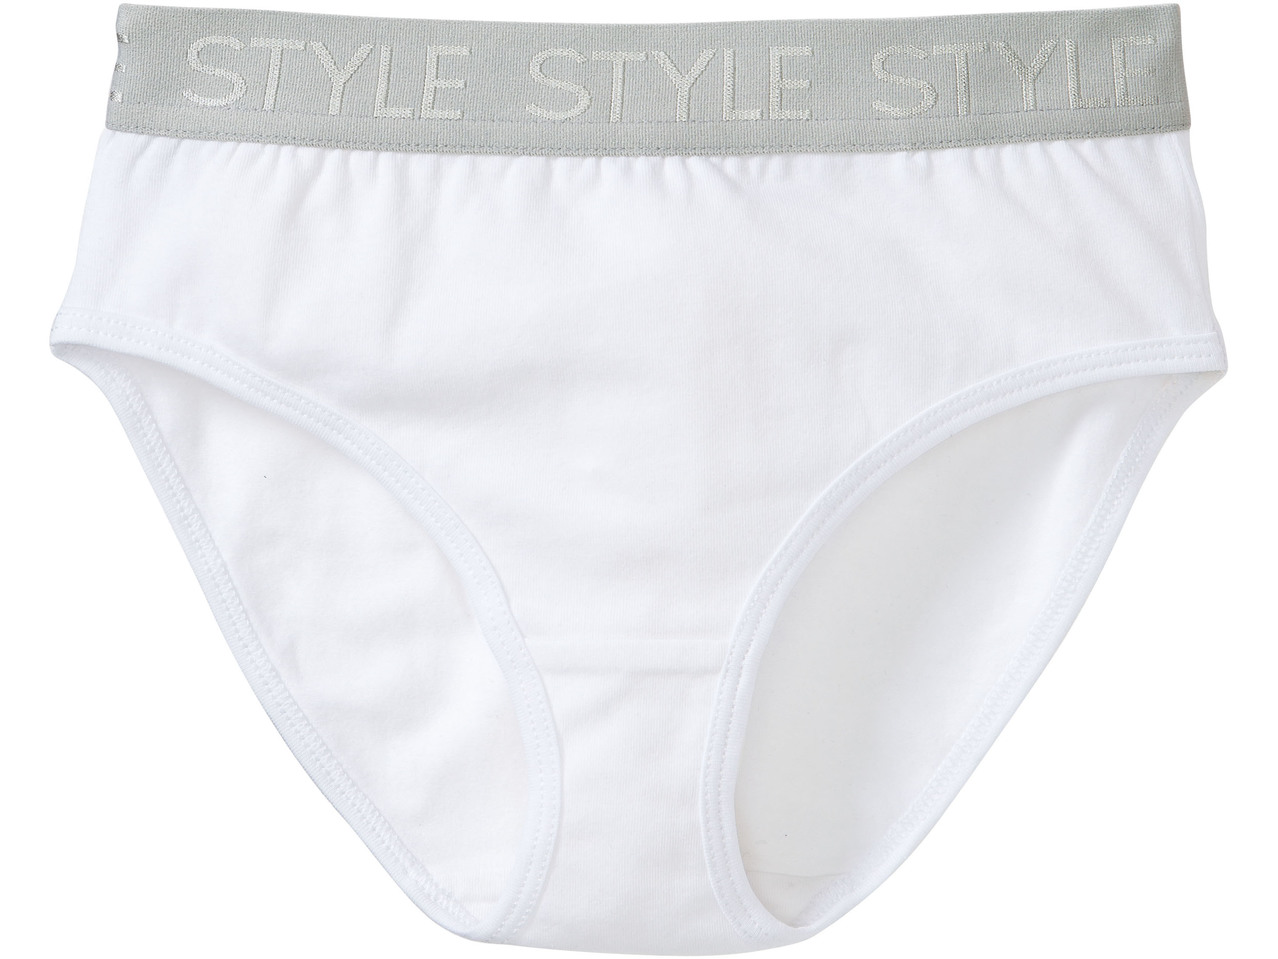 Girl's Briefs or Hipster Briefs, 5 pieces